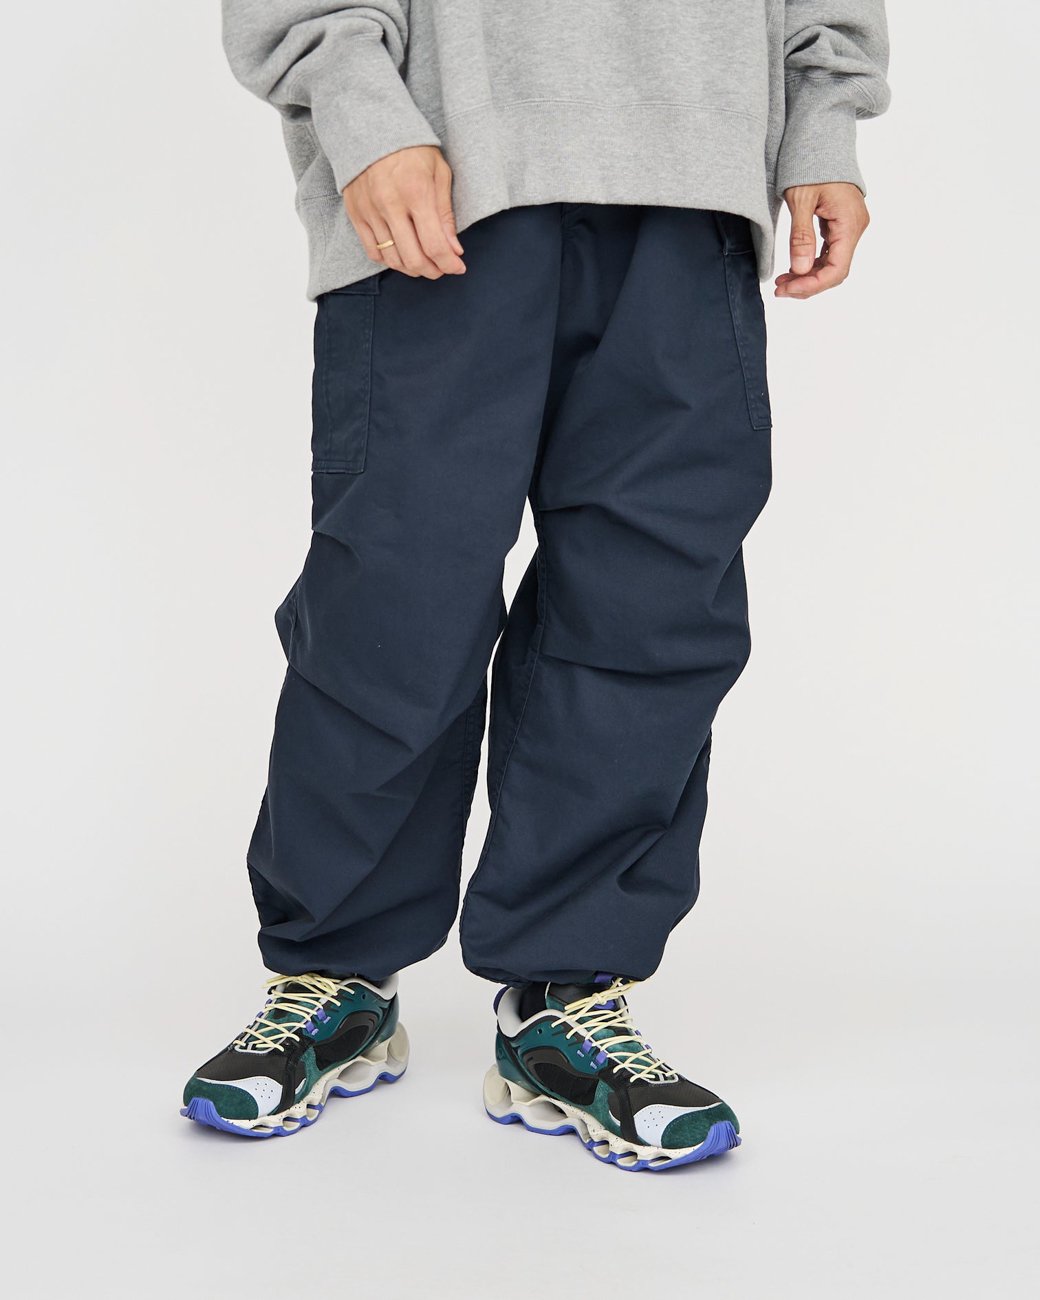 Graphpaper * Pigment Drill Field Pants(3色展開)